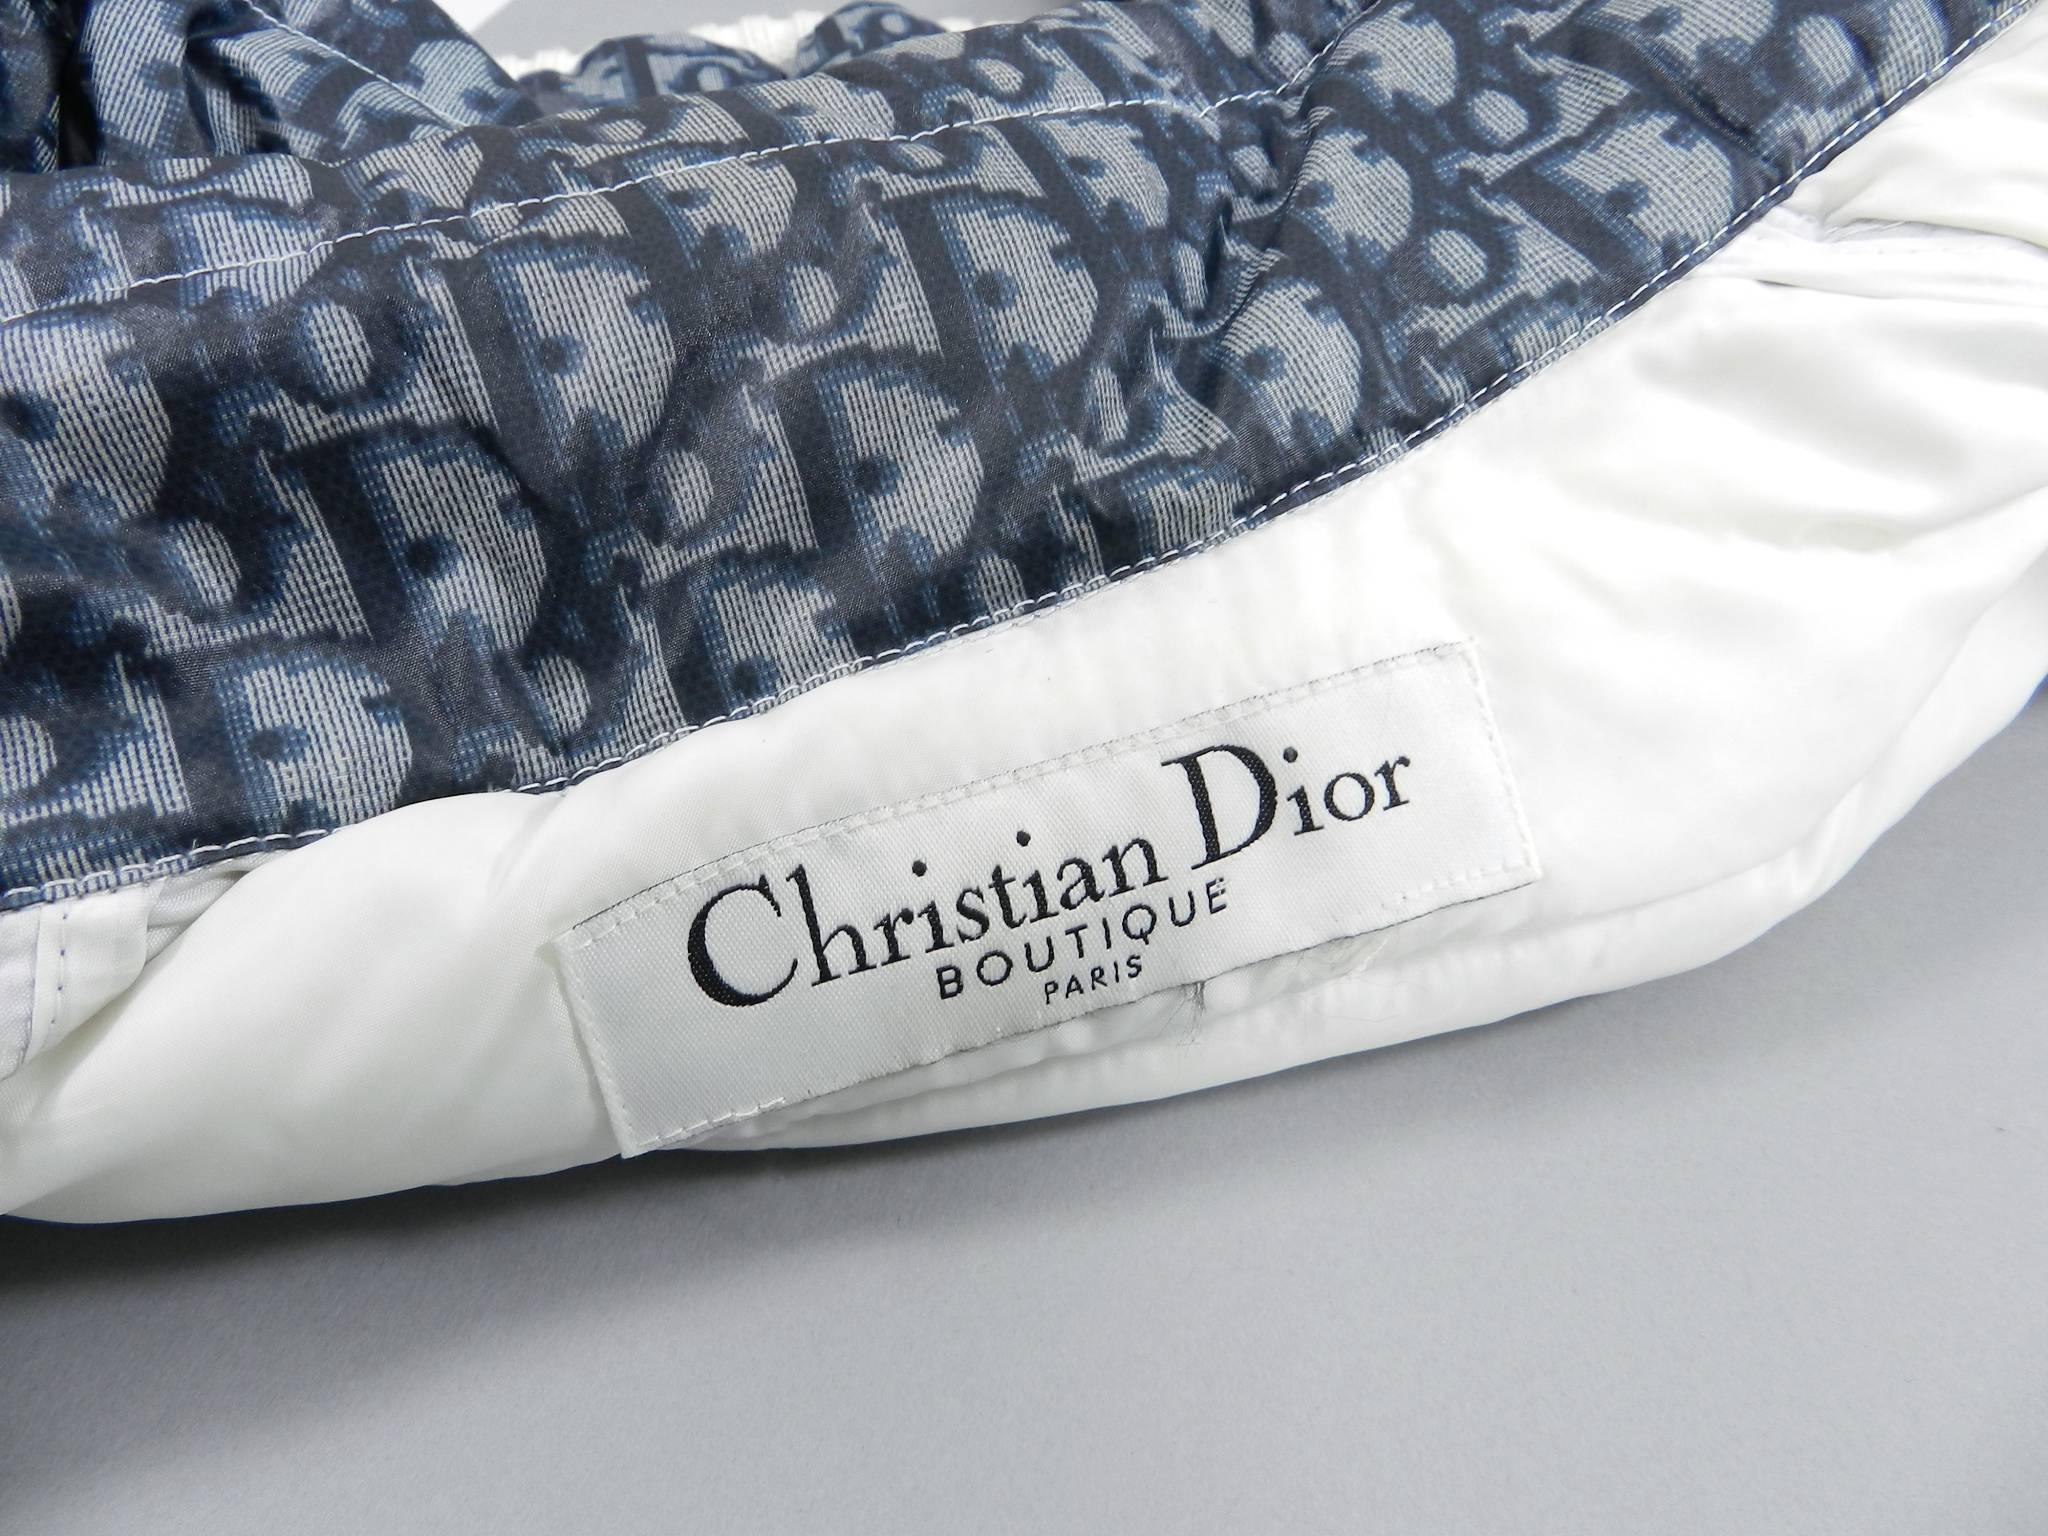 Christian Dior Fall 2004 blue monogam puffer ski jacket.  Off-white ribbed wool trim.  Size tag is removed but is likely a FR 34 / 36 and best for USA XS size 2.  To fit 32-33